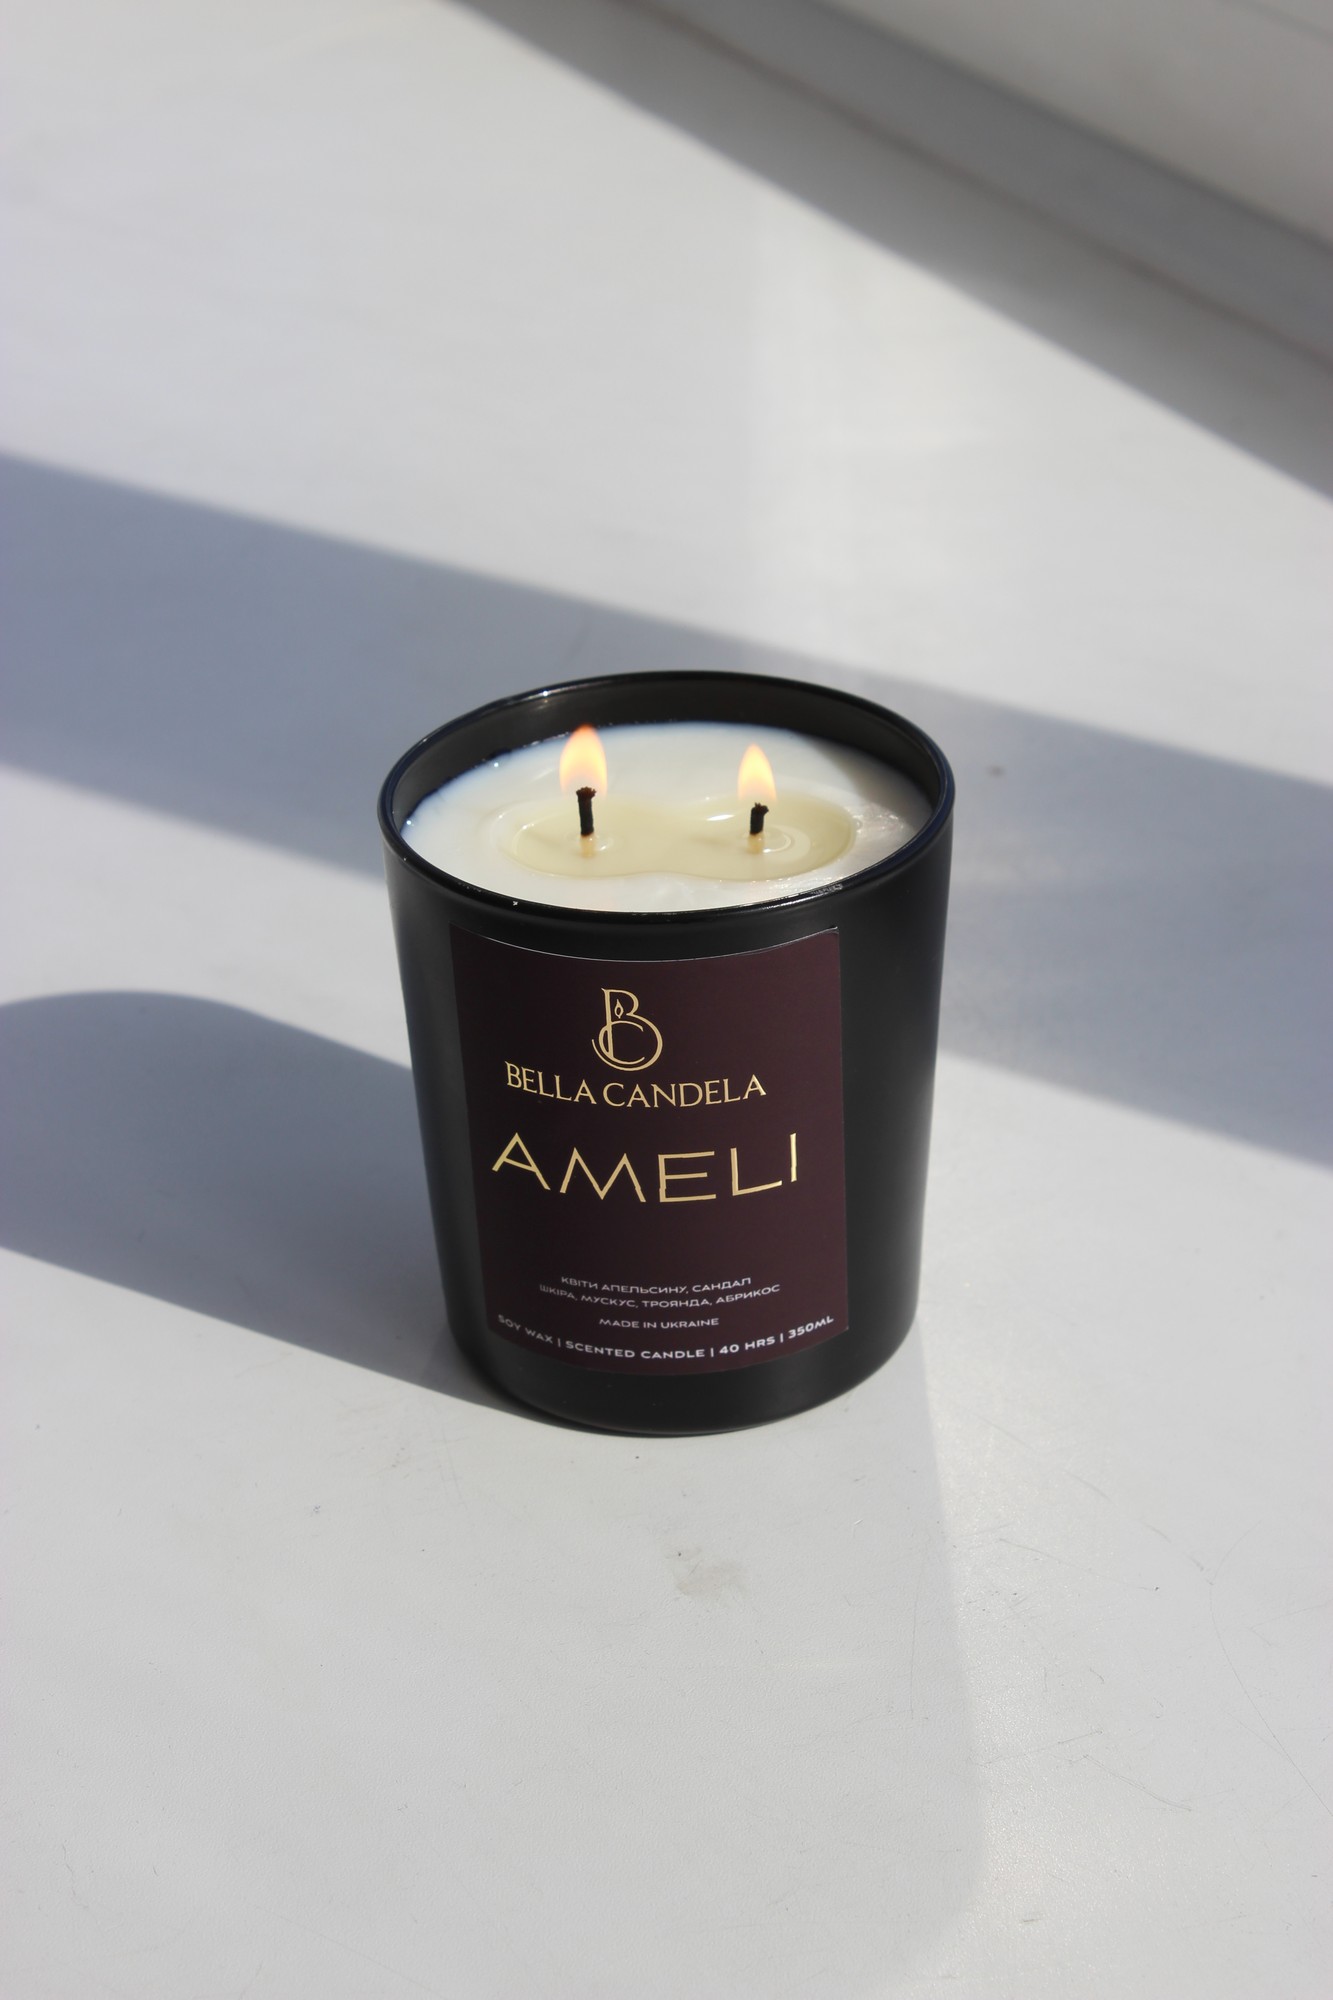 Soy perfumed candle in a glass with a rich and complex aroma "AMELI"